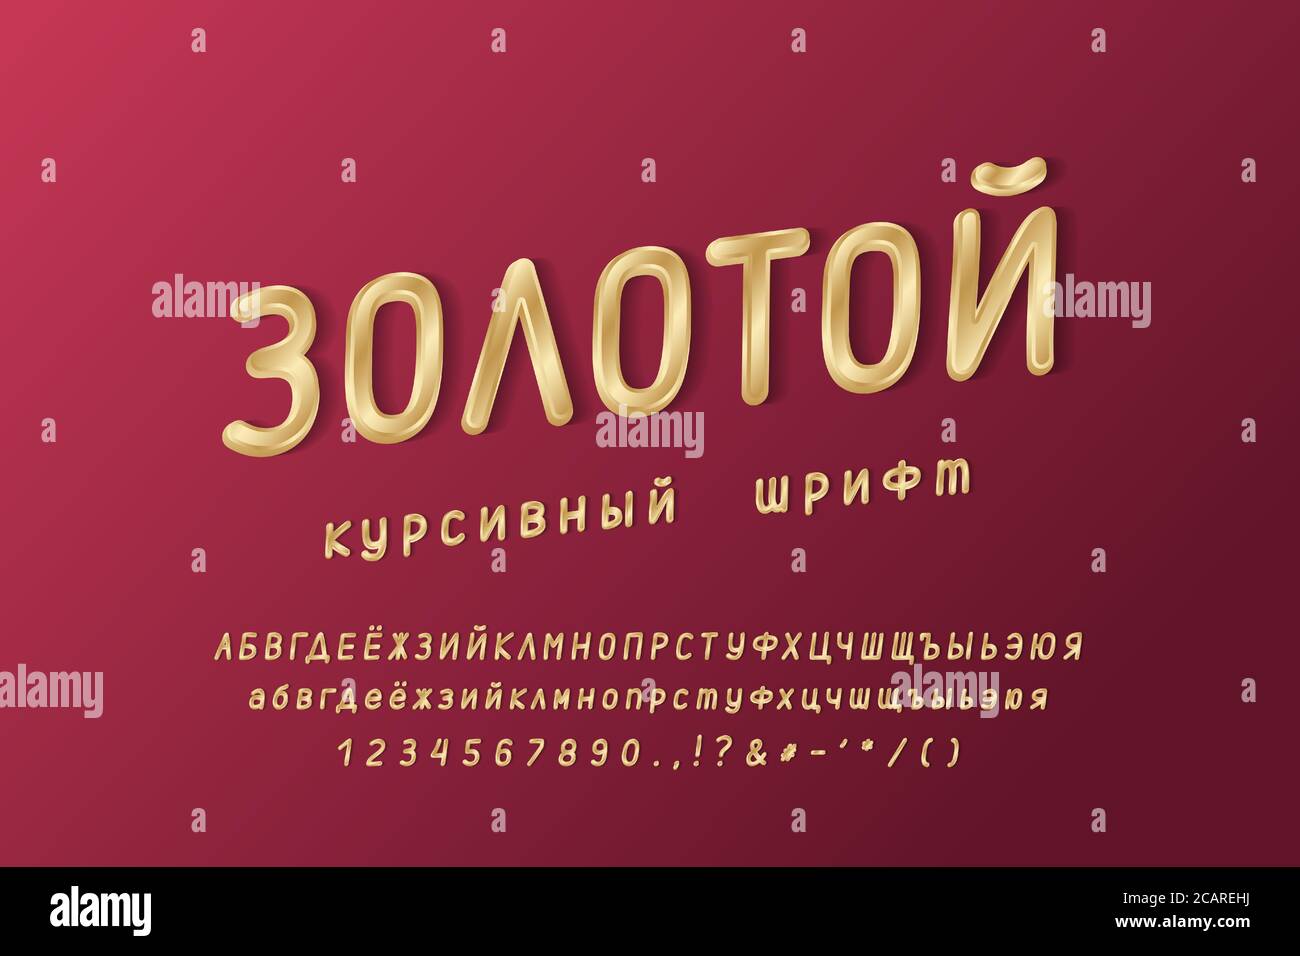 Elegant golden Cyrillic alphabet. Uppercase and lowercase letters, numbers. Thin condensed italic vector font, gold color gradient. Russian text, Gold Stock Vector